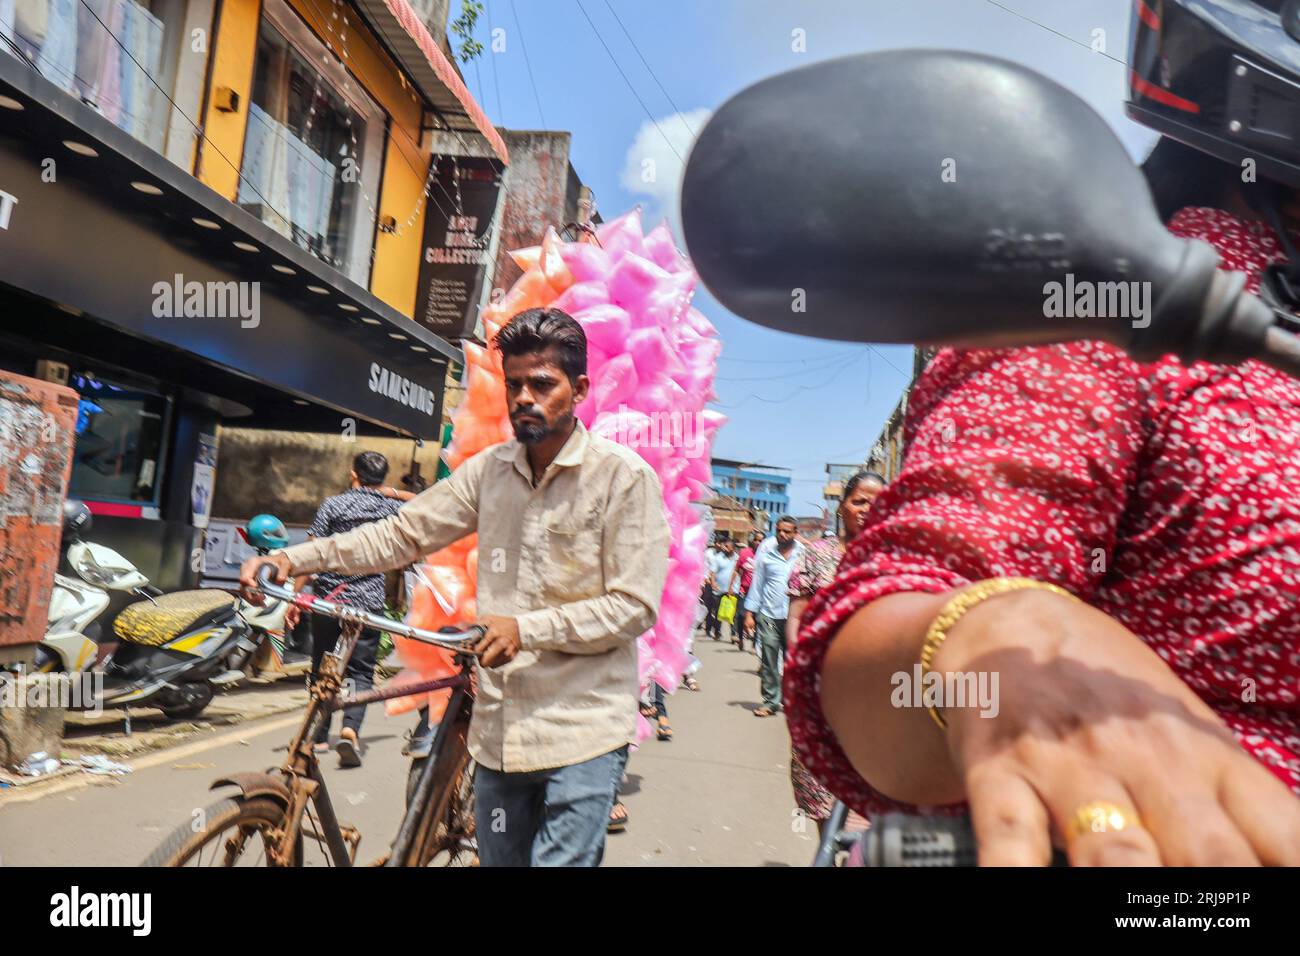 Margao, South Goa, India. 22nd Aug, 2023. Narrow passage ways selling anything imaginable in the busy and colourful market at the city of Margao, South India.Paul Quezada-Neiman/Alamy Live News Credit: Paul Quezada-Neiman/Alamy Live News Stock Photo